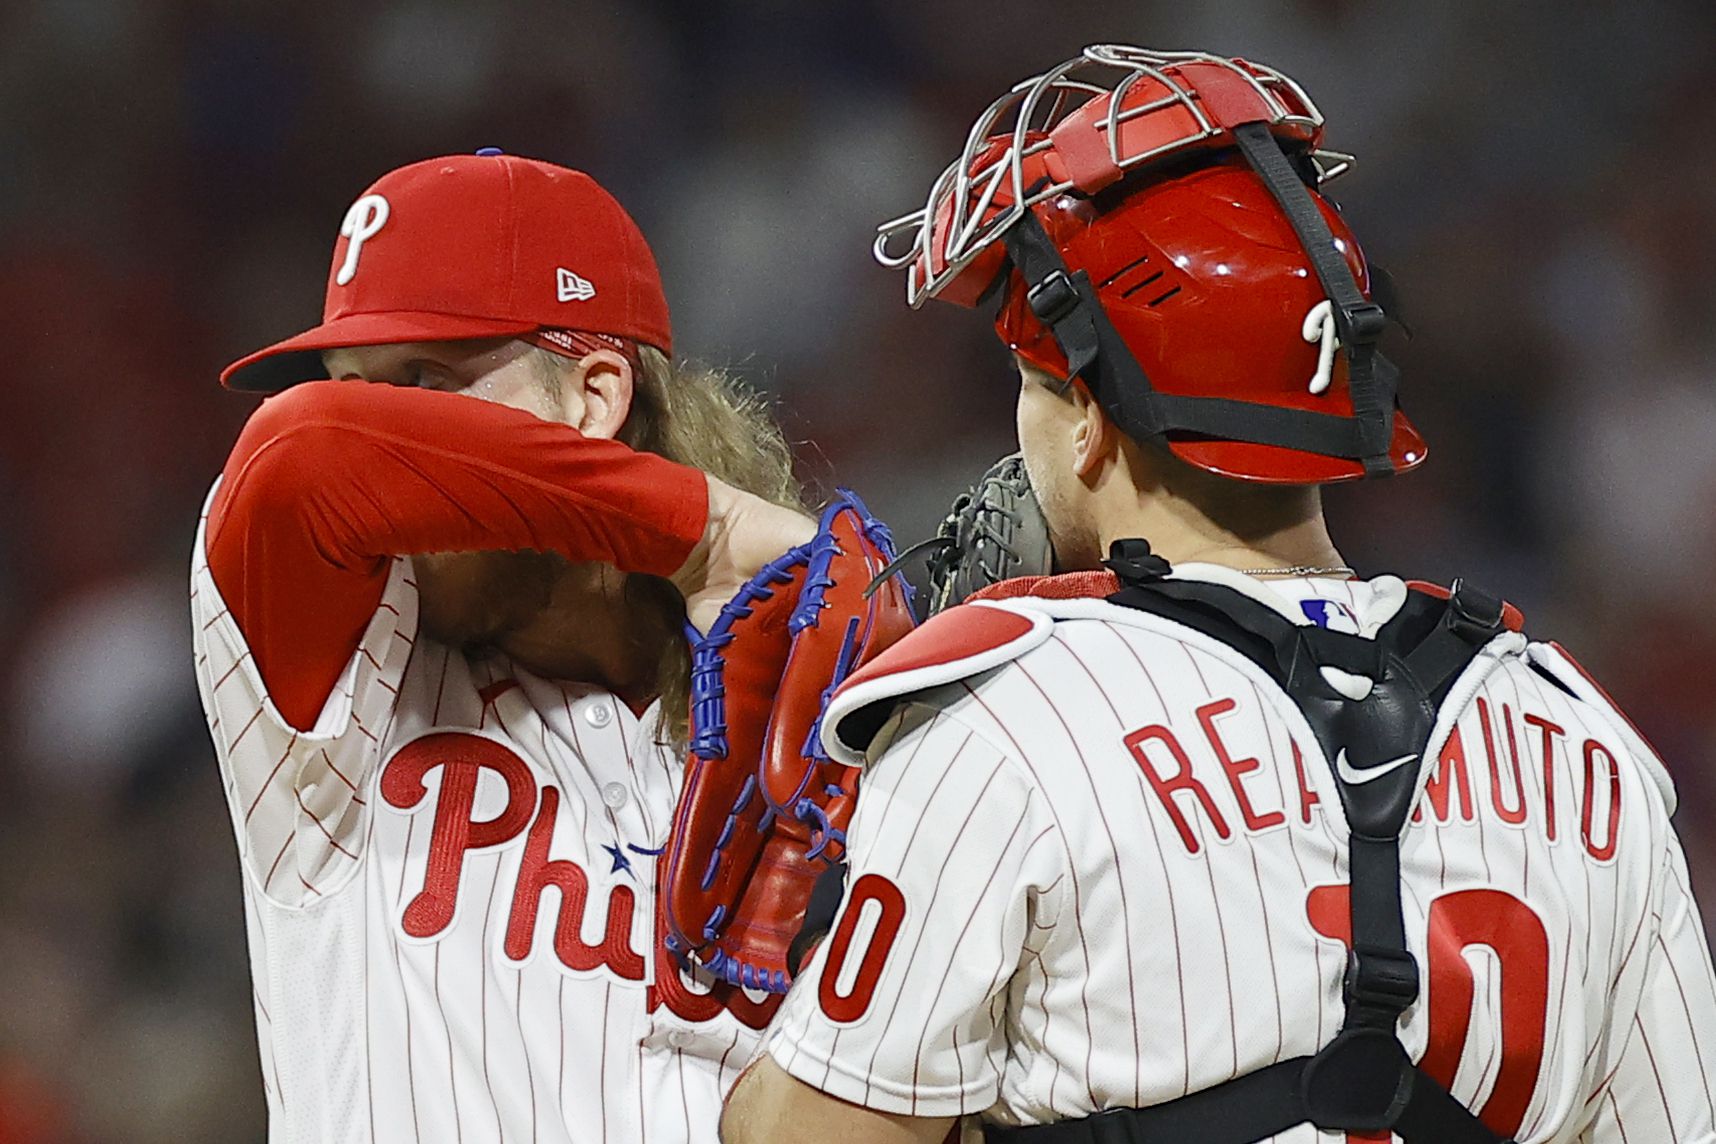 Phillies Bryce Harper becomes local hero after Helping a 7-Year-Old reunite  with his Family